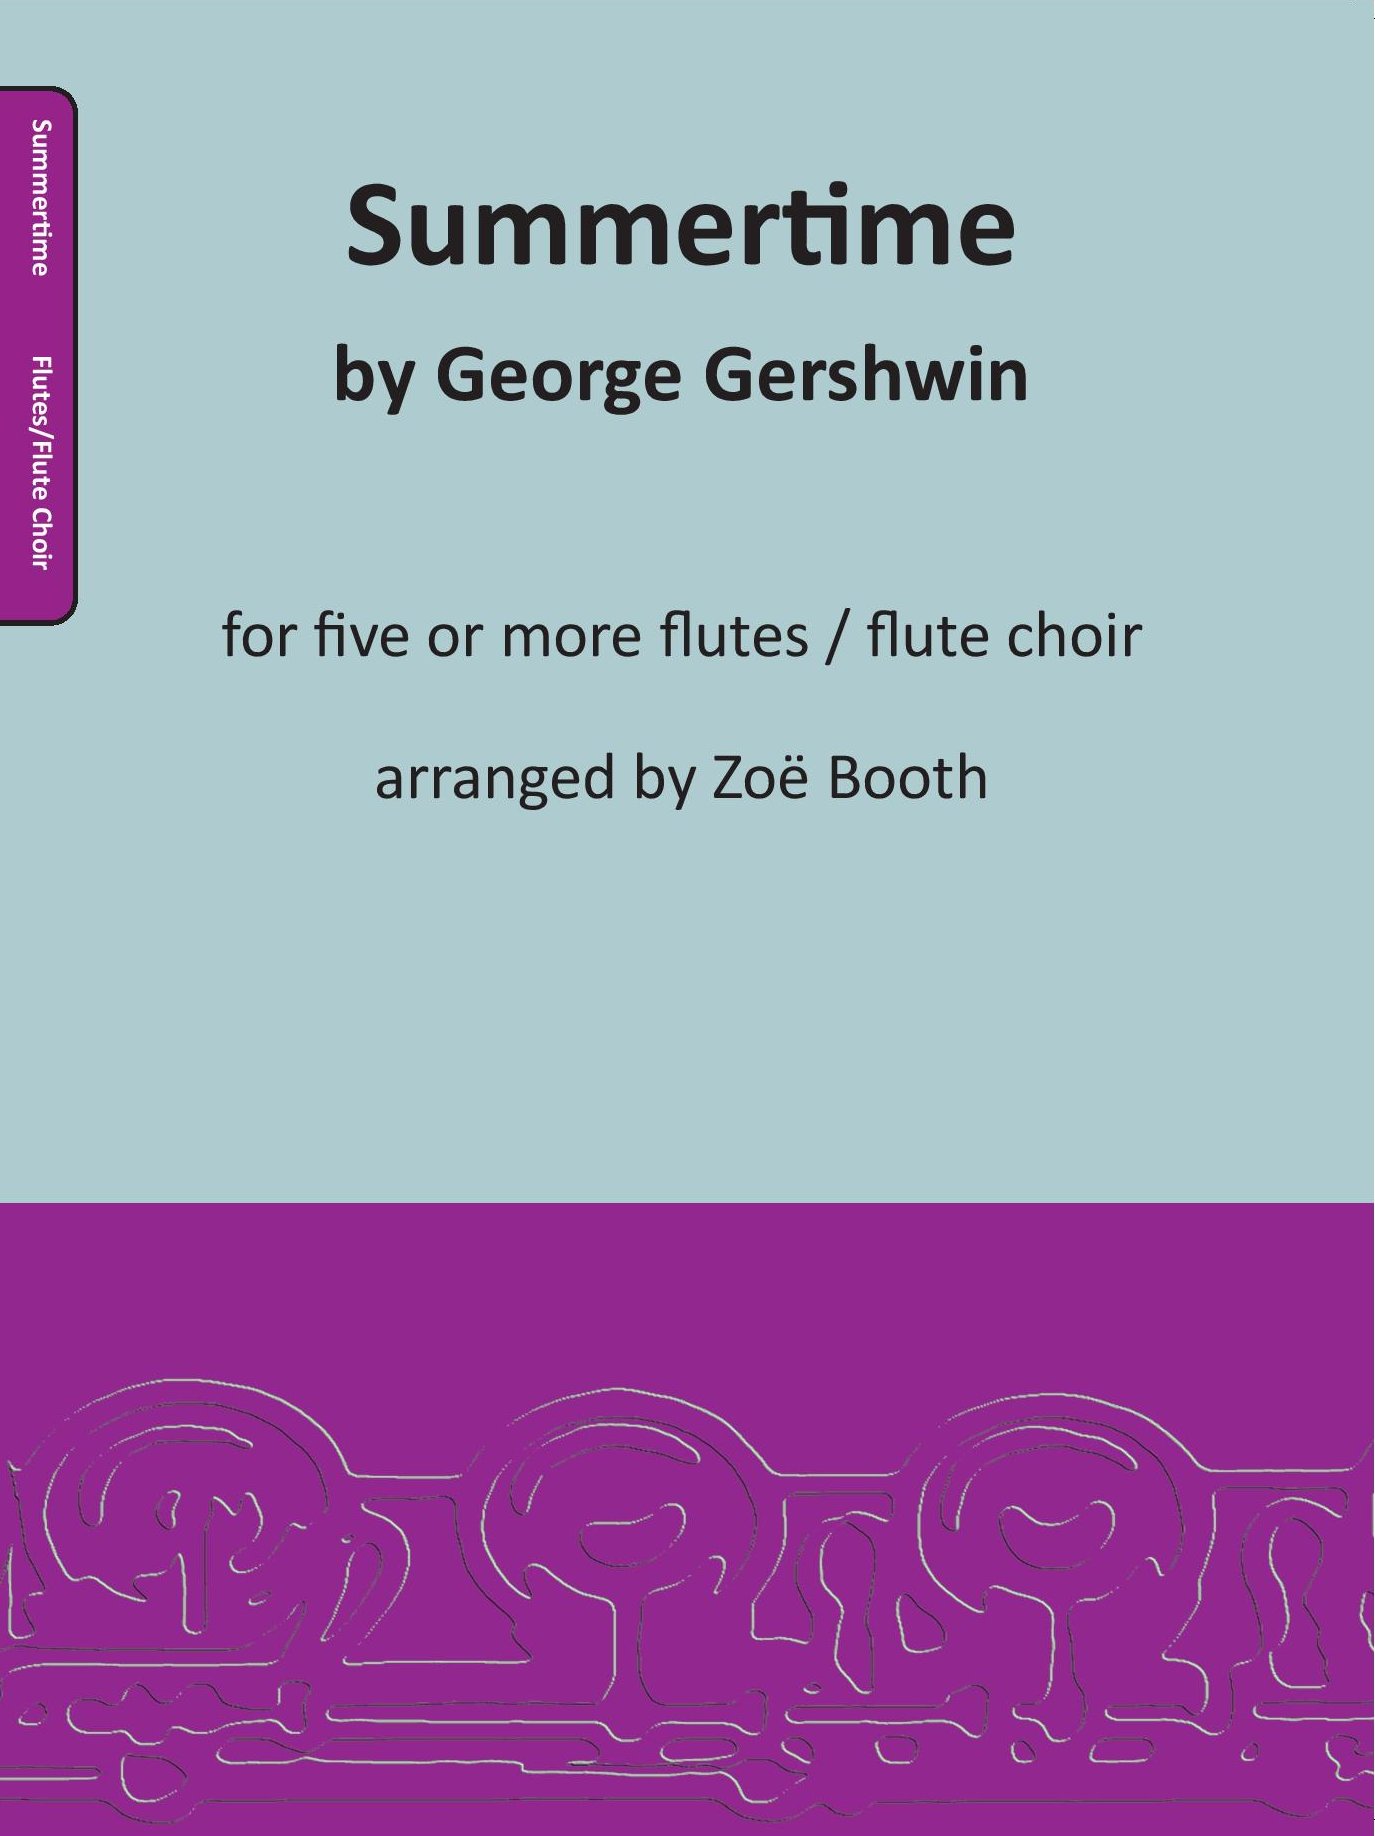 Summertime by Gershwin,  arranged by Zoë Booth for five or more flutes/flute choir